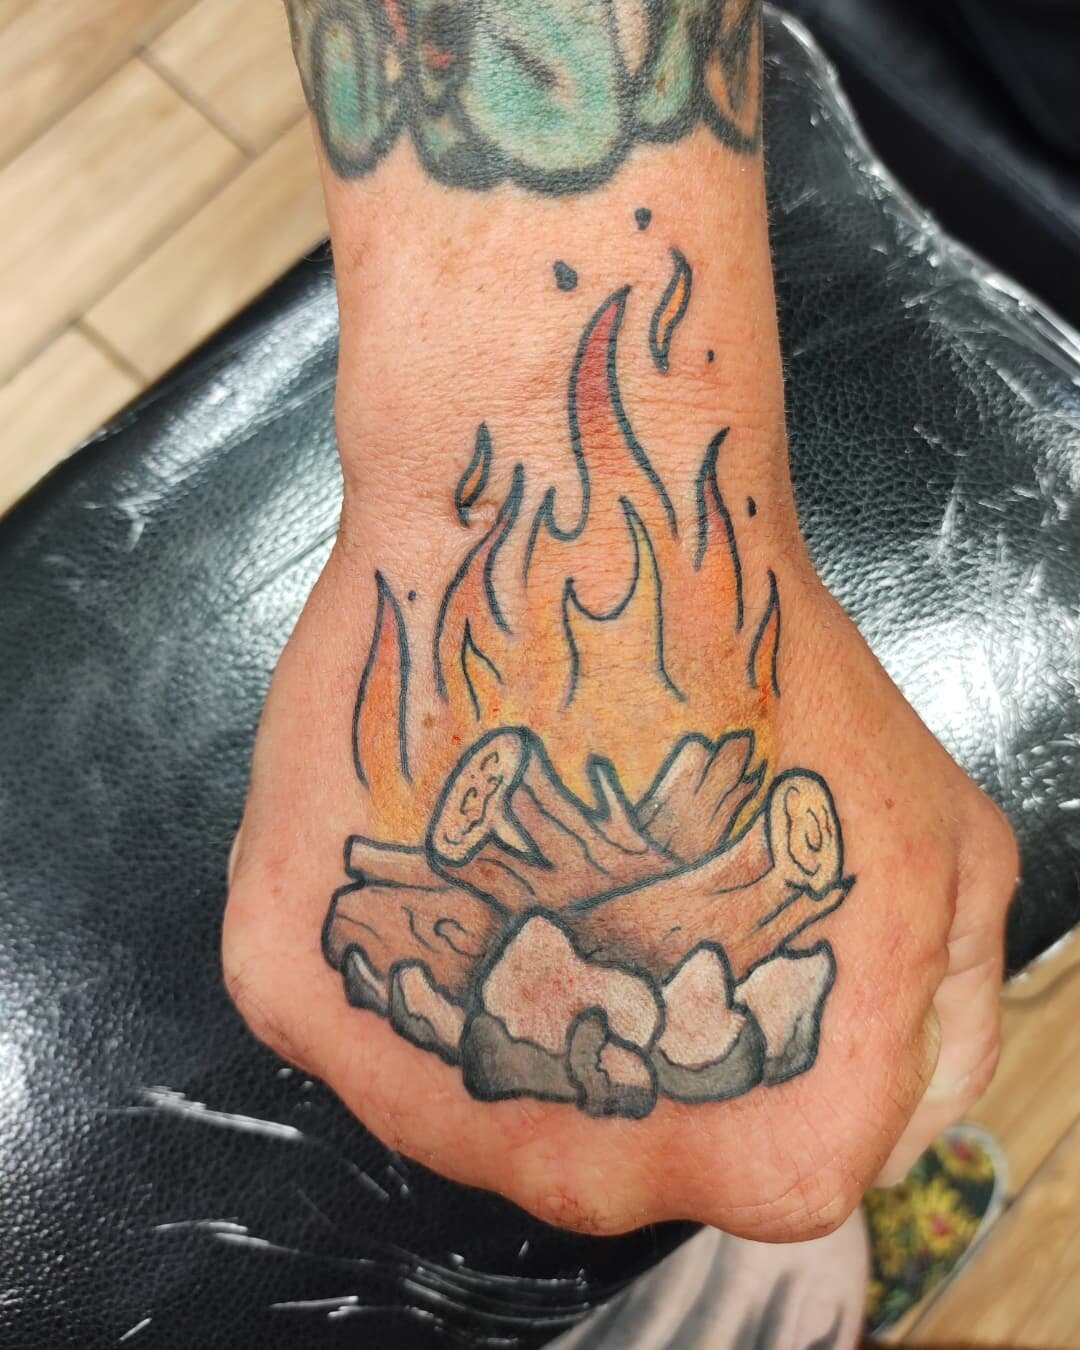 🔥 hand tattoo by @noahpentz . DM him directly for pricing and availability!